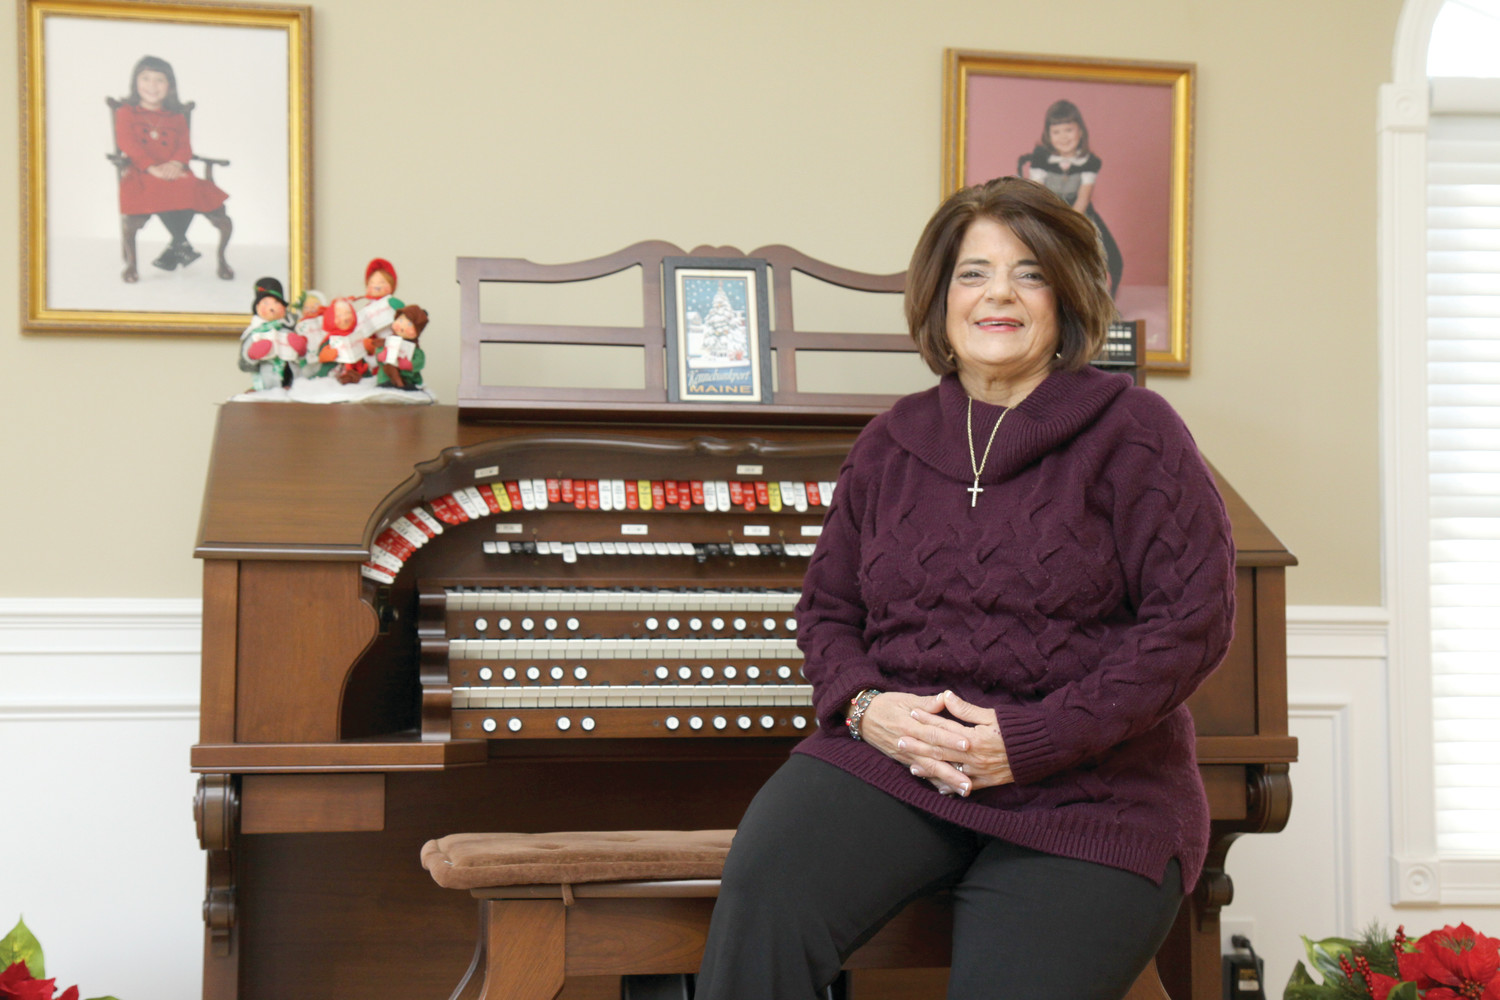 Carol Mitola, a gifted musician, sits beside her organ at her Scituate home with photos of her daughters Kara, who graduated from St. Mary Academy Bay-View, and Marissa, a La Salle grad, displayed on the wall behind her. Mitola has chronic kidney disease and is hoping a living kidney donor will help her restore her health before she needs to go on dialysis.